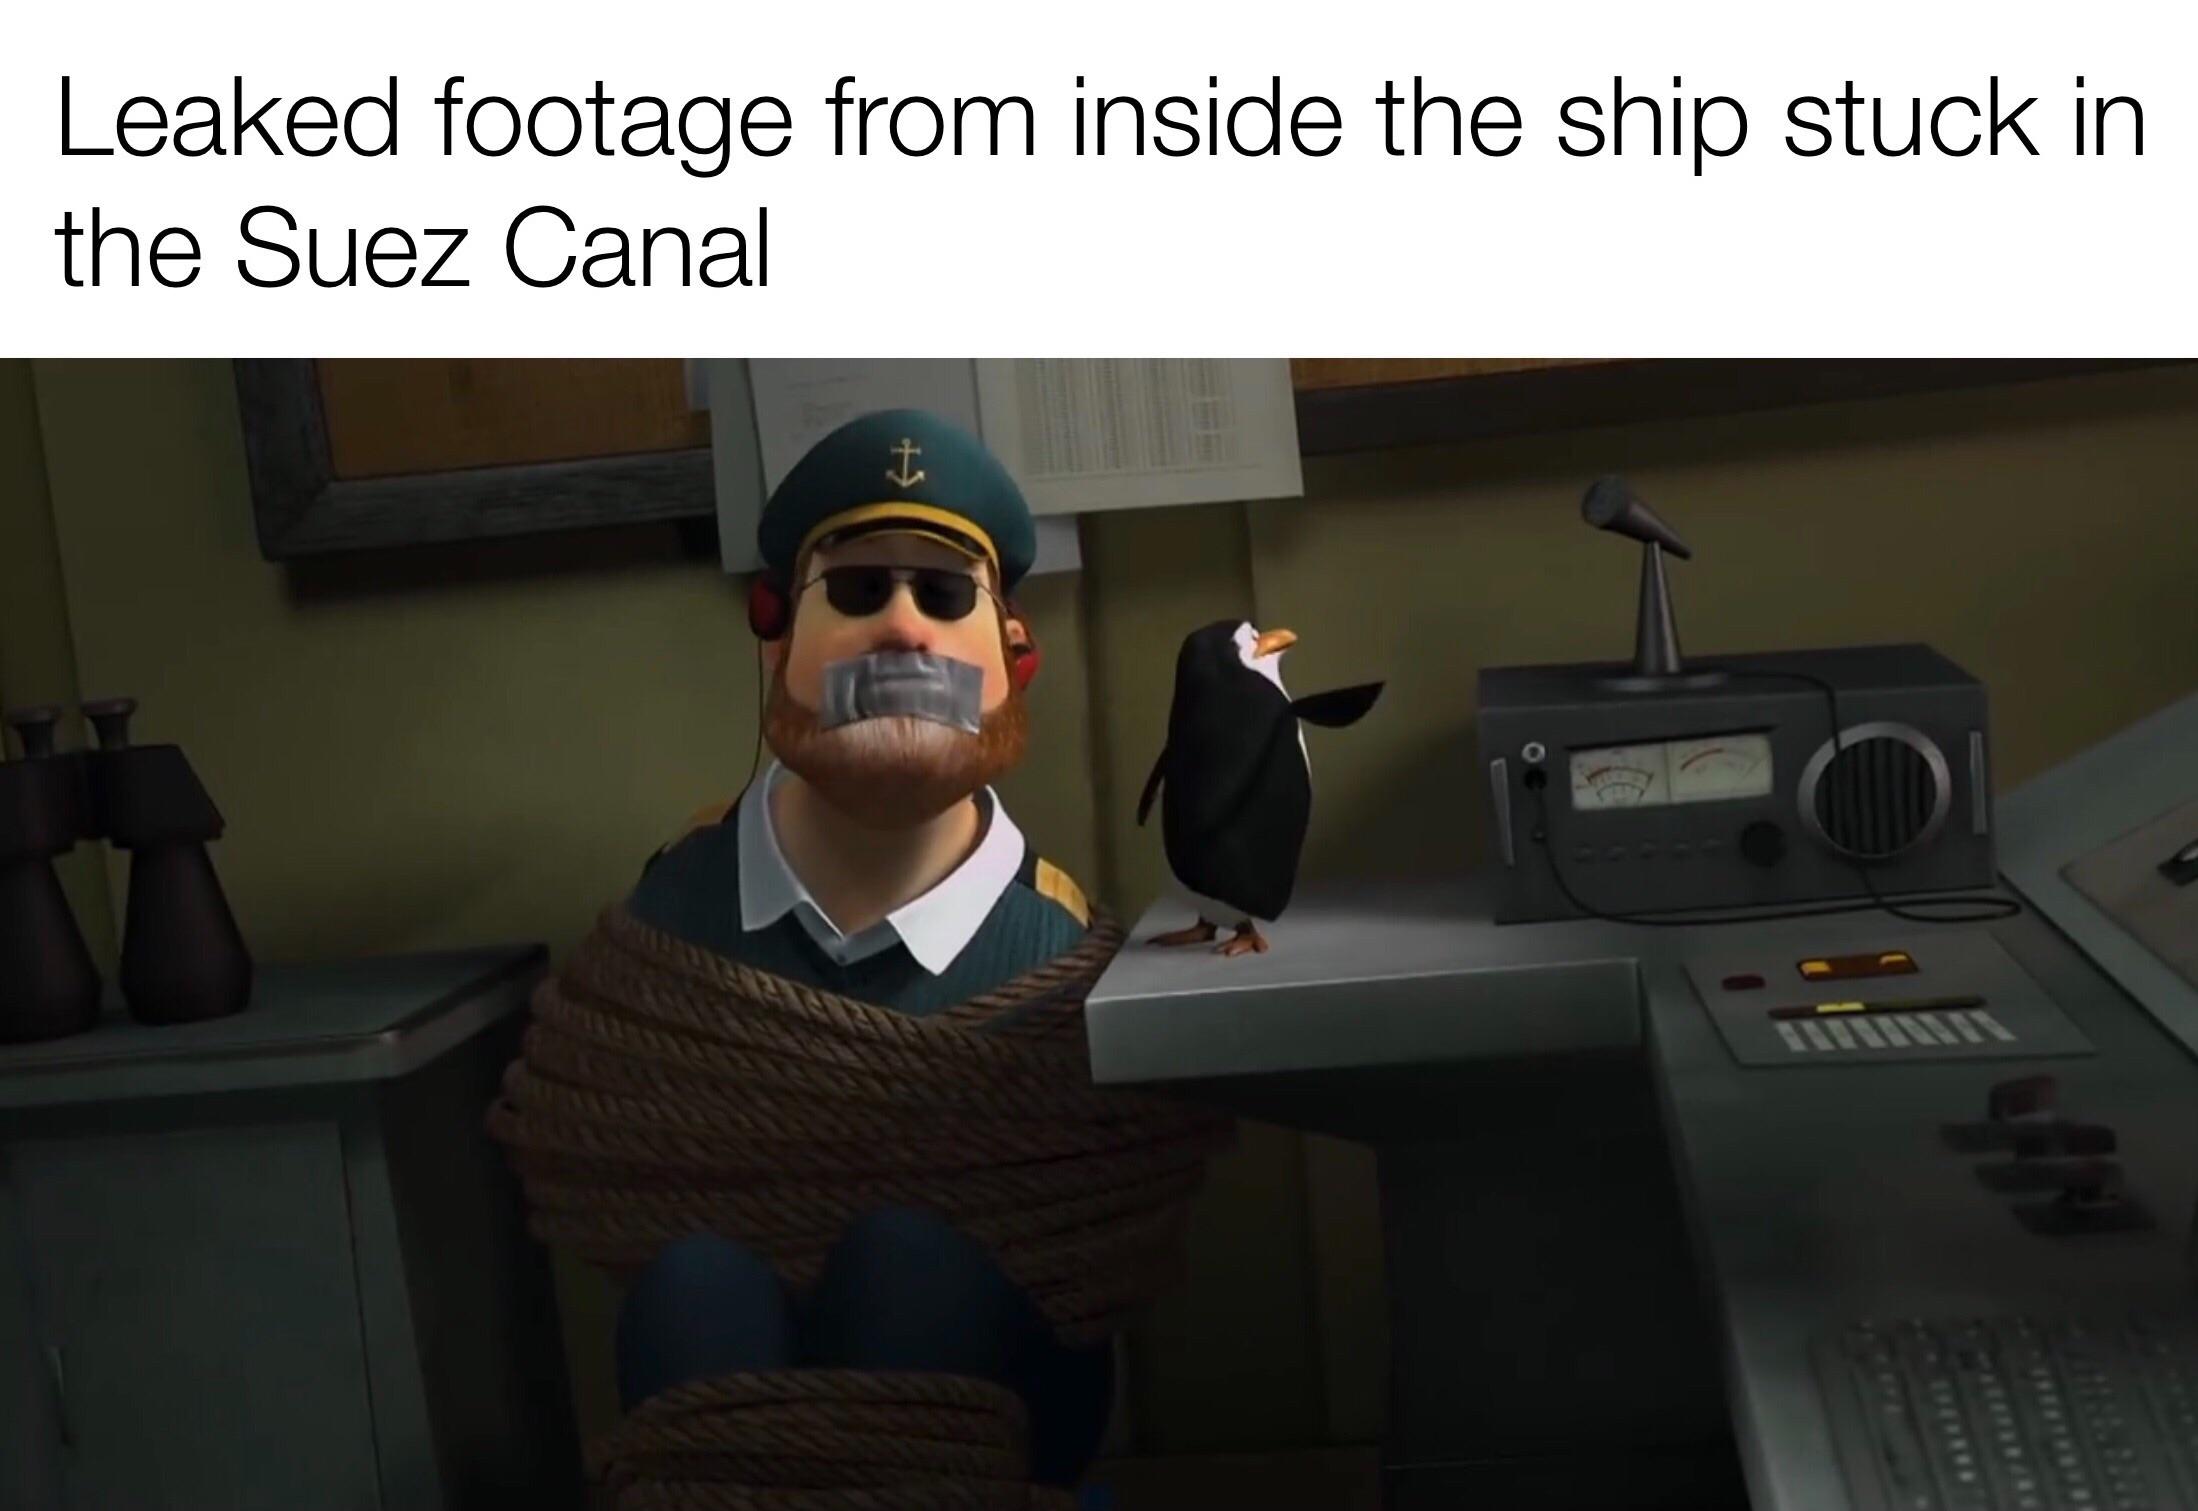 Suez Canal - Leaked footage from inside the ship stuck in the Suez Canal $